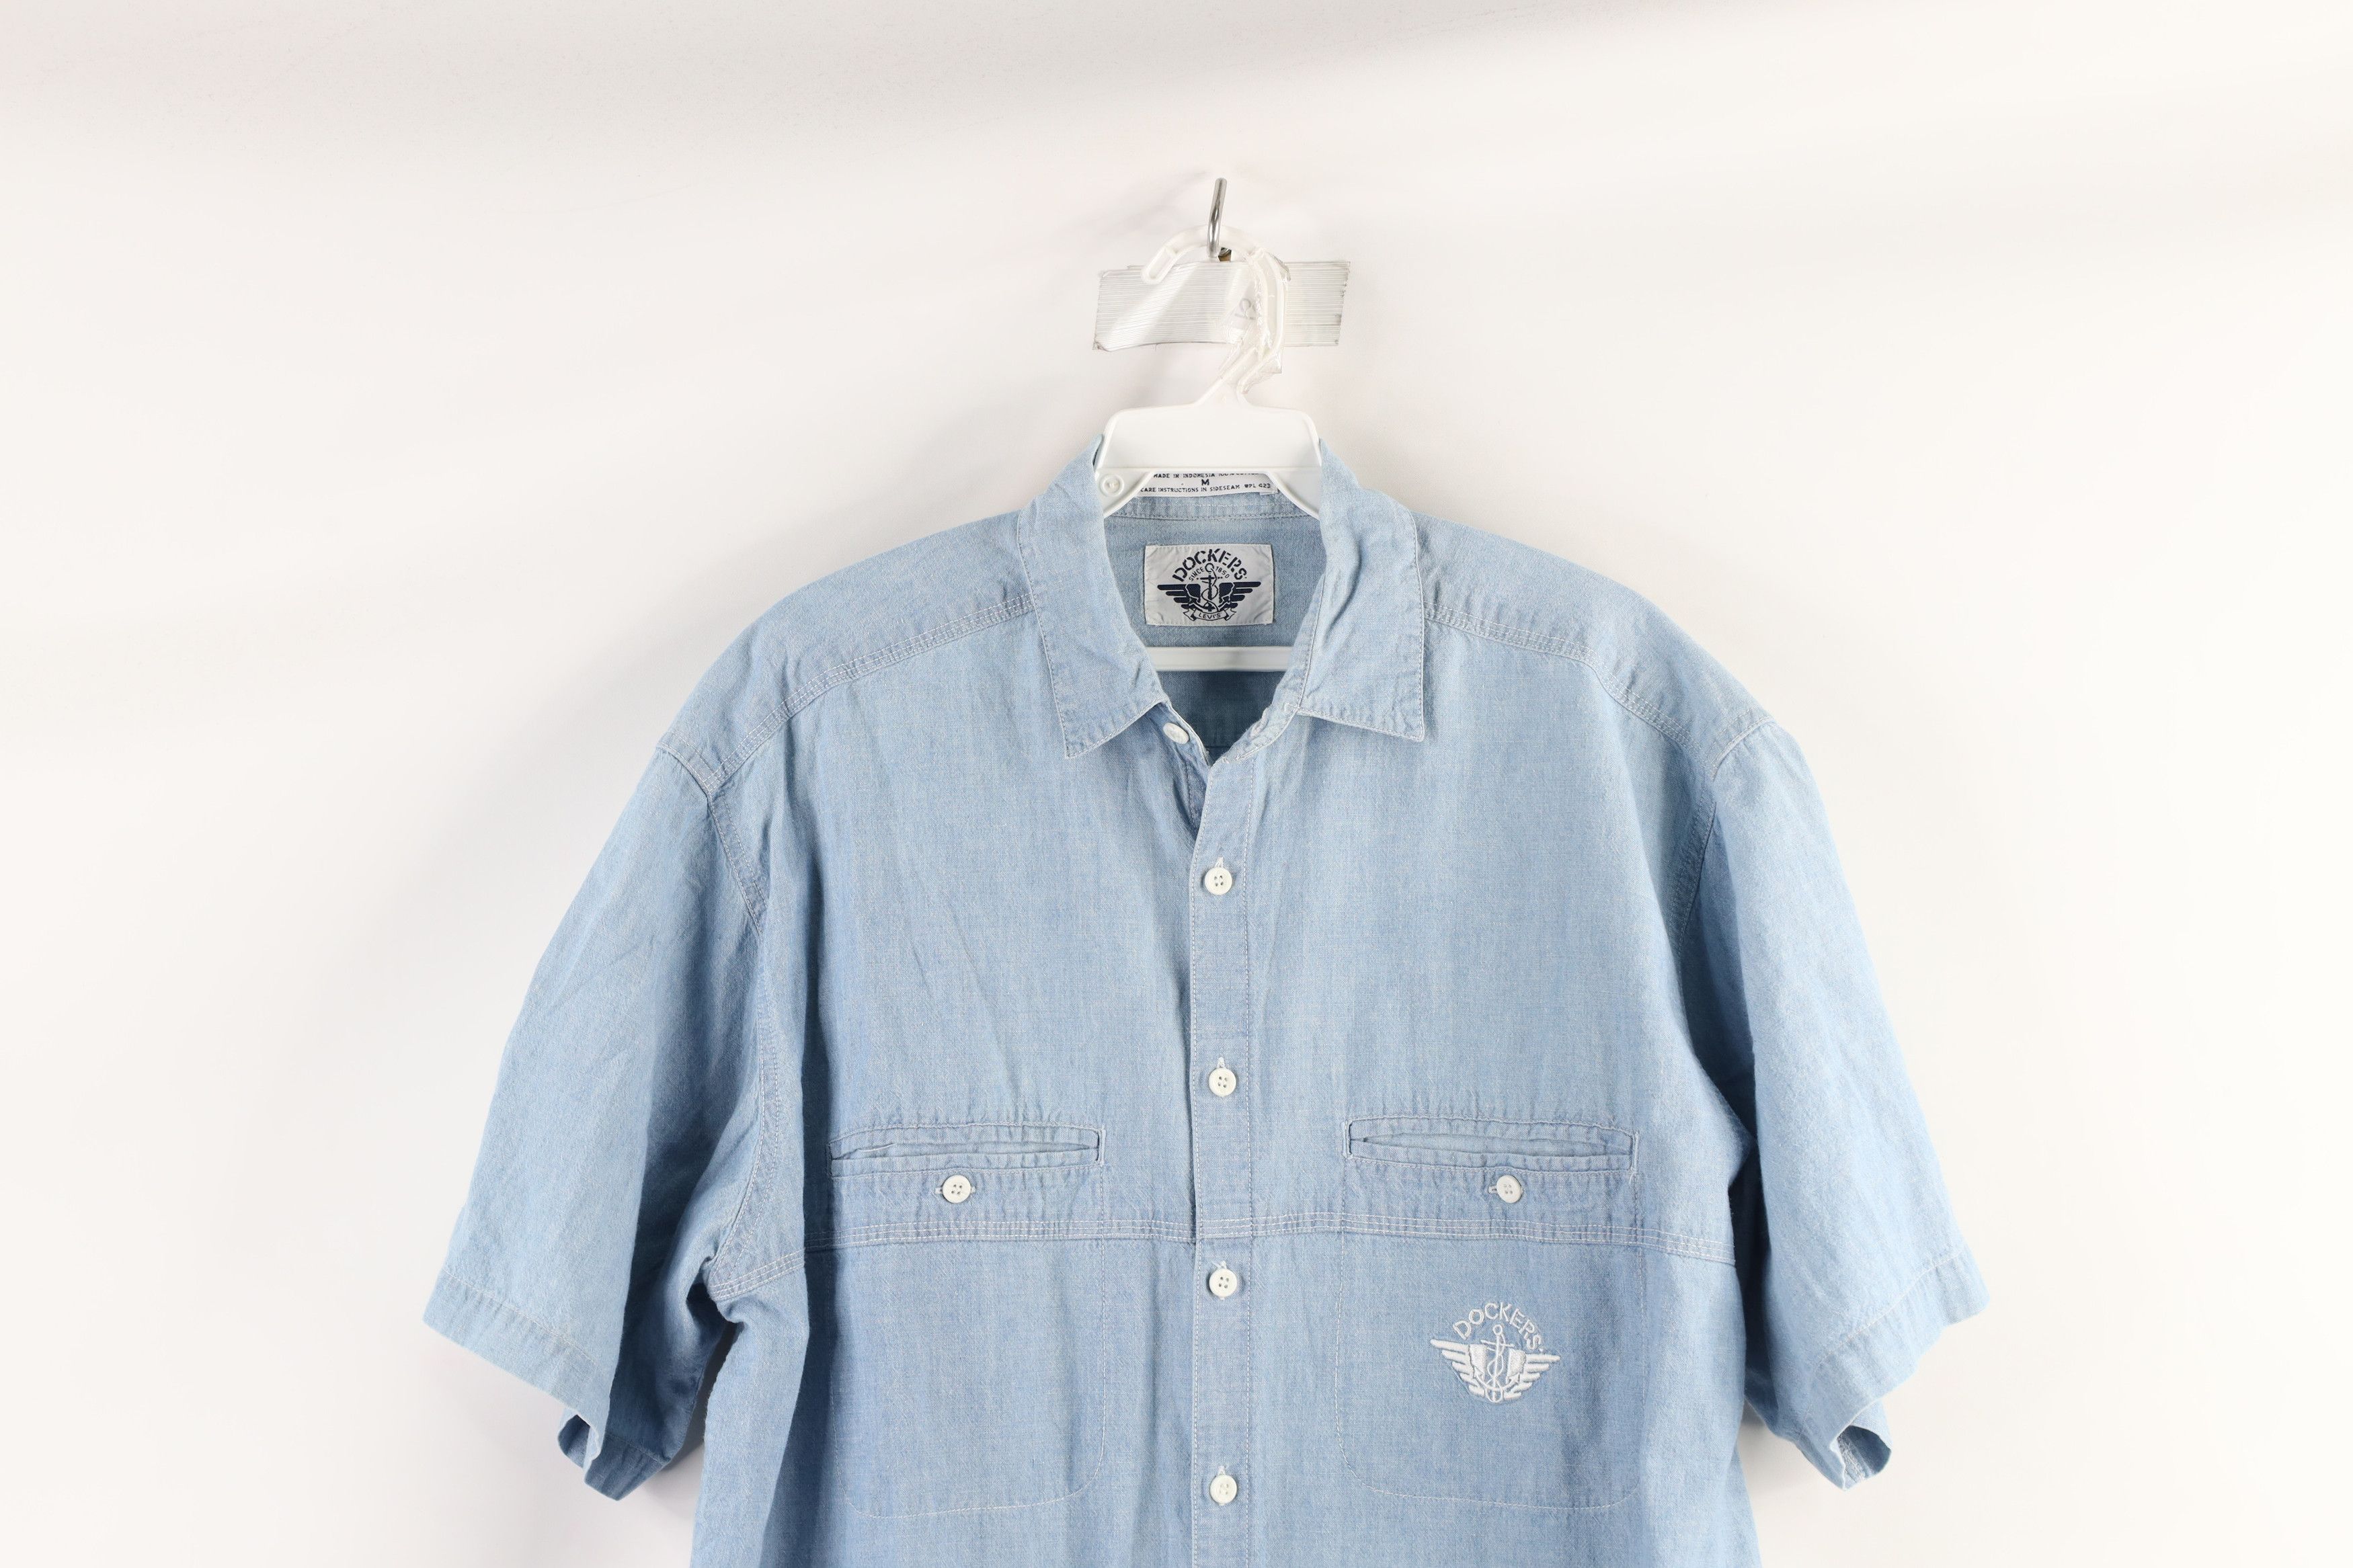 Vintage Vintage 90s Dockers Chambray Short Sleeve Button Shirt Size US M / EU 48-50 / 2 - 2 Preview